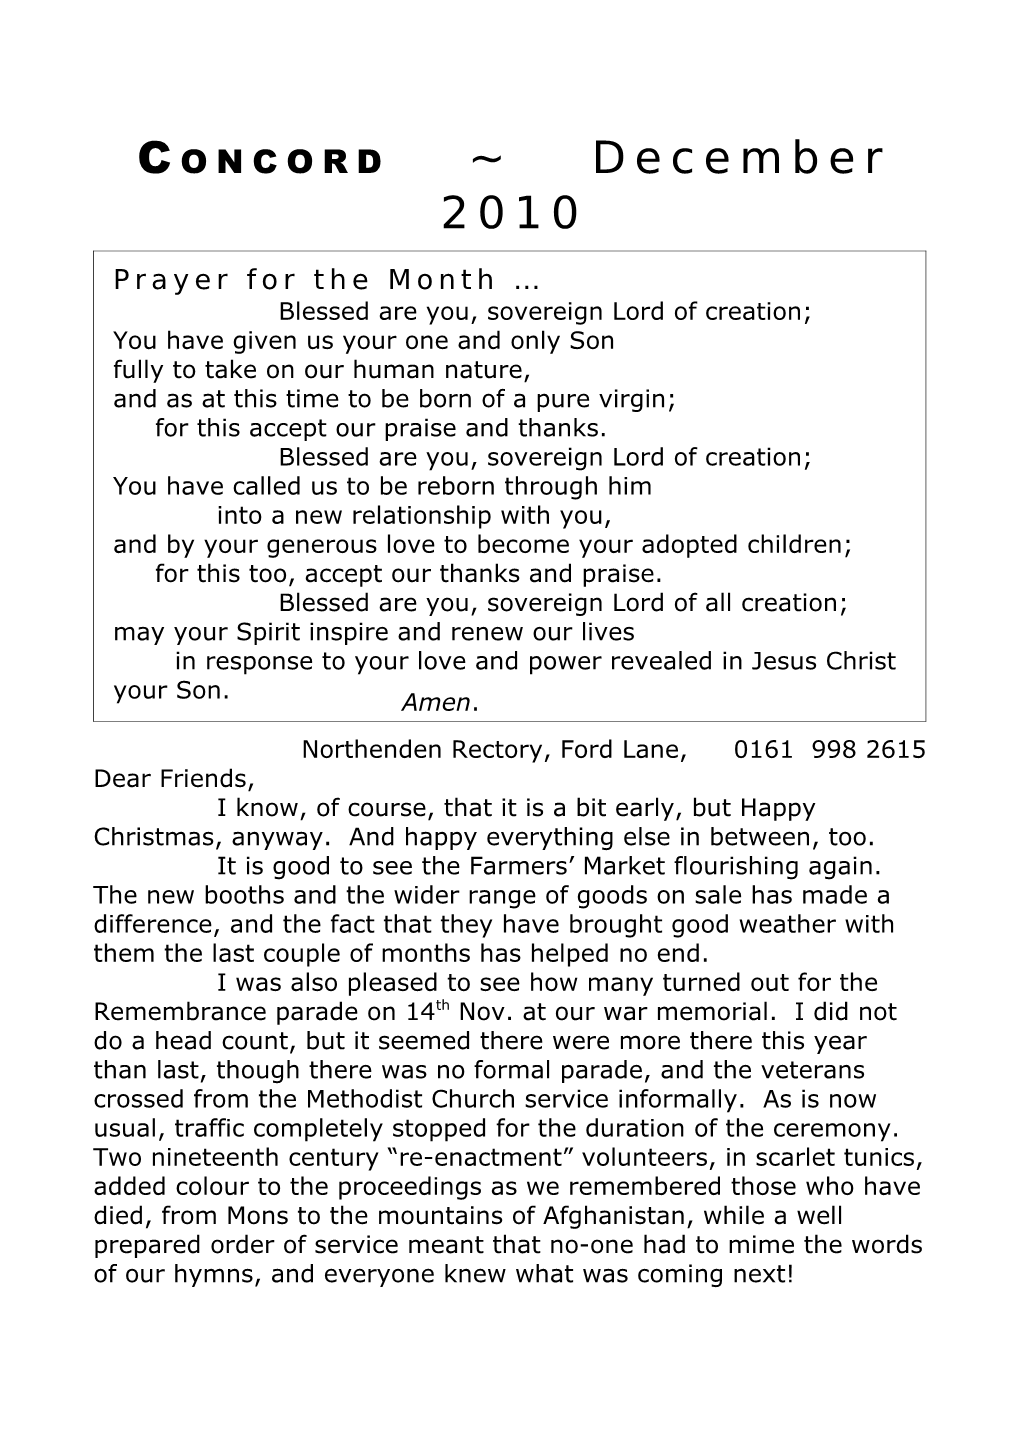 Prayer for the Month